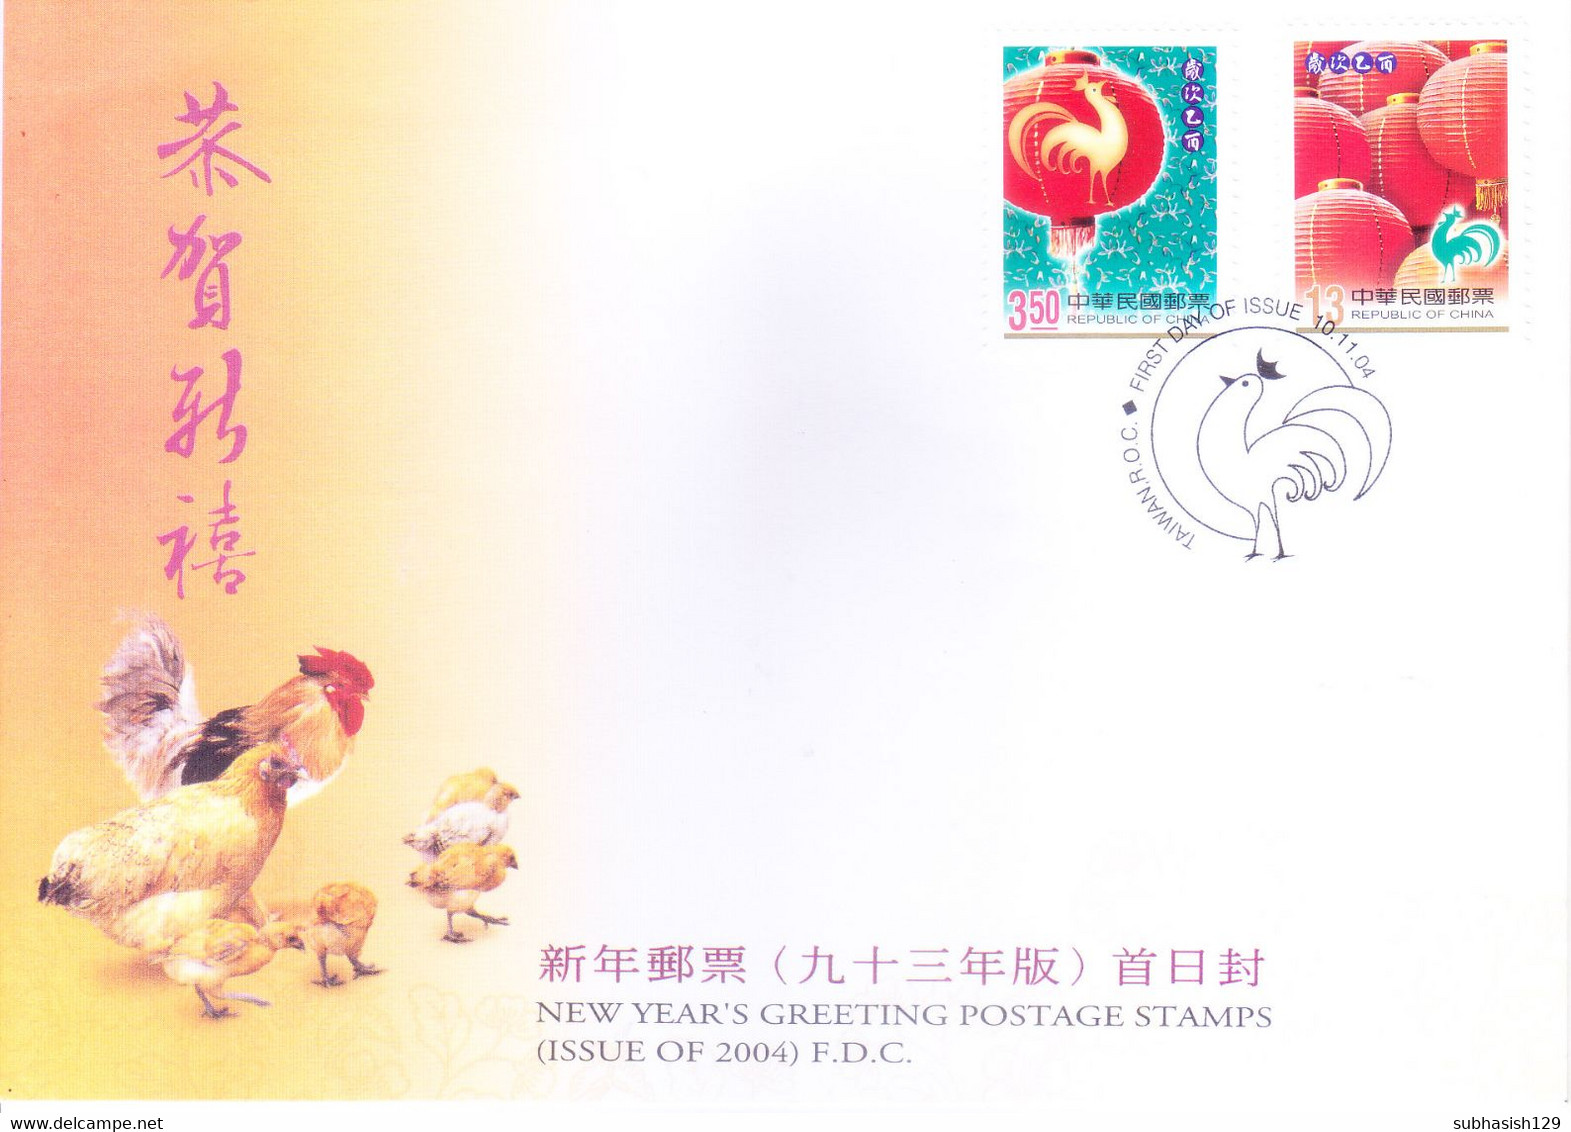 TAIWAN - CHINESE ADMINISTRATION : FDC : 10 NOV 2004 : NEW YEAR GREETINGS, LUNAR CHINESE ZODIAC CHICKEN LANTERN - Covers & Documents